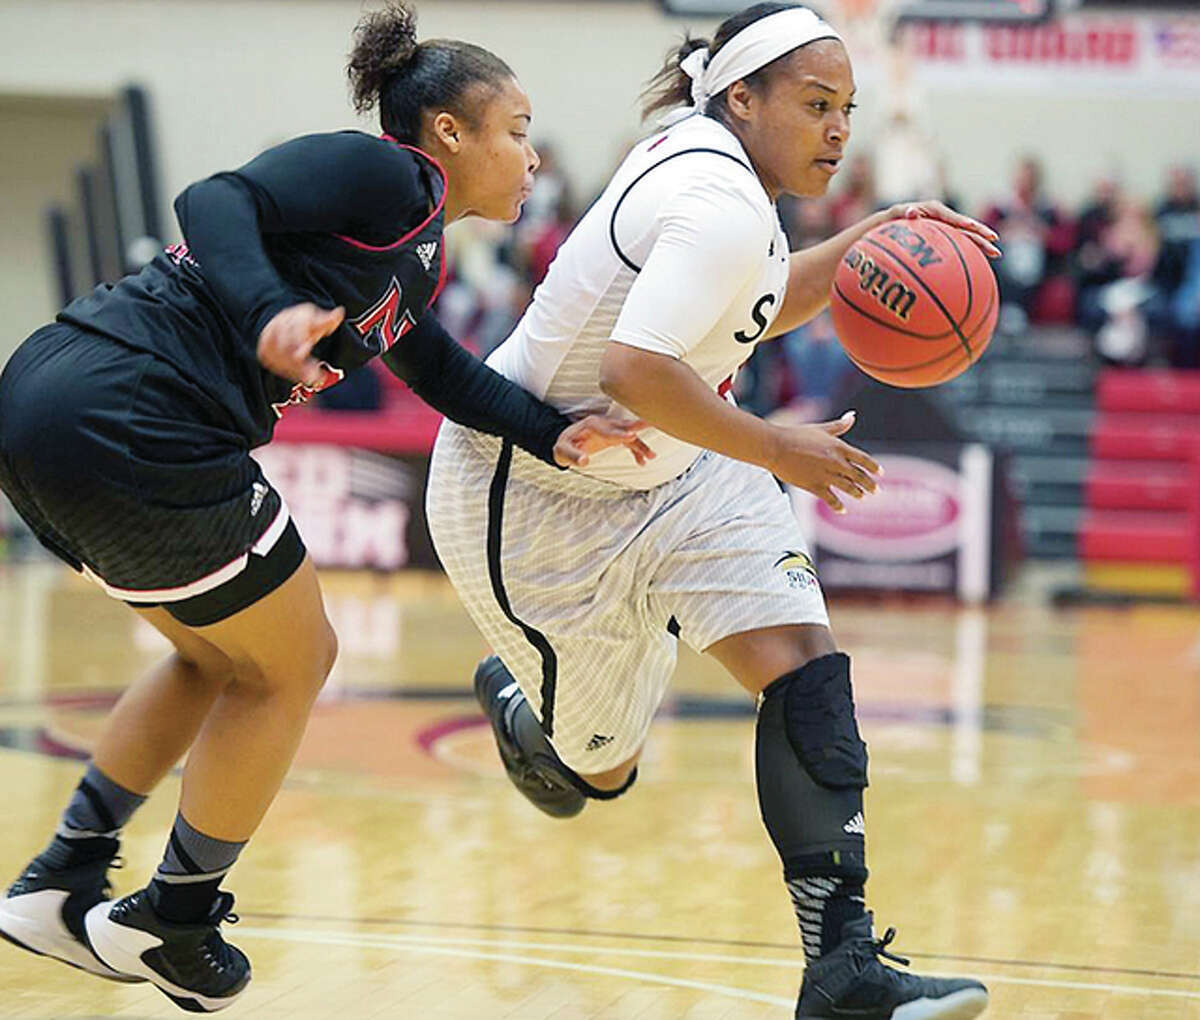 Shronda Butts led SIUE with 23 points, but the Cougars fell to rival SIUC 71-57 Friday in Carbondale